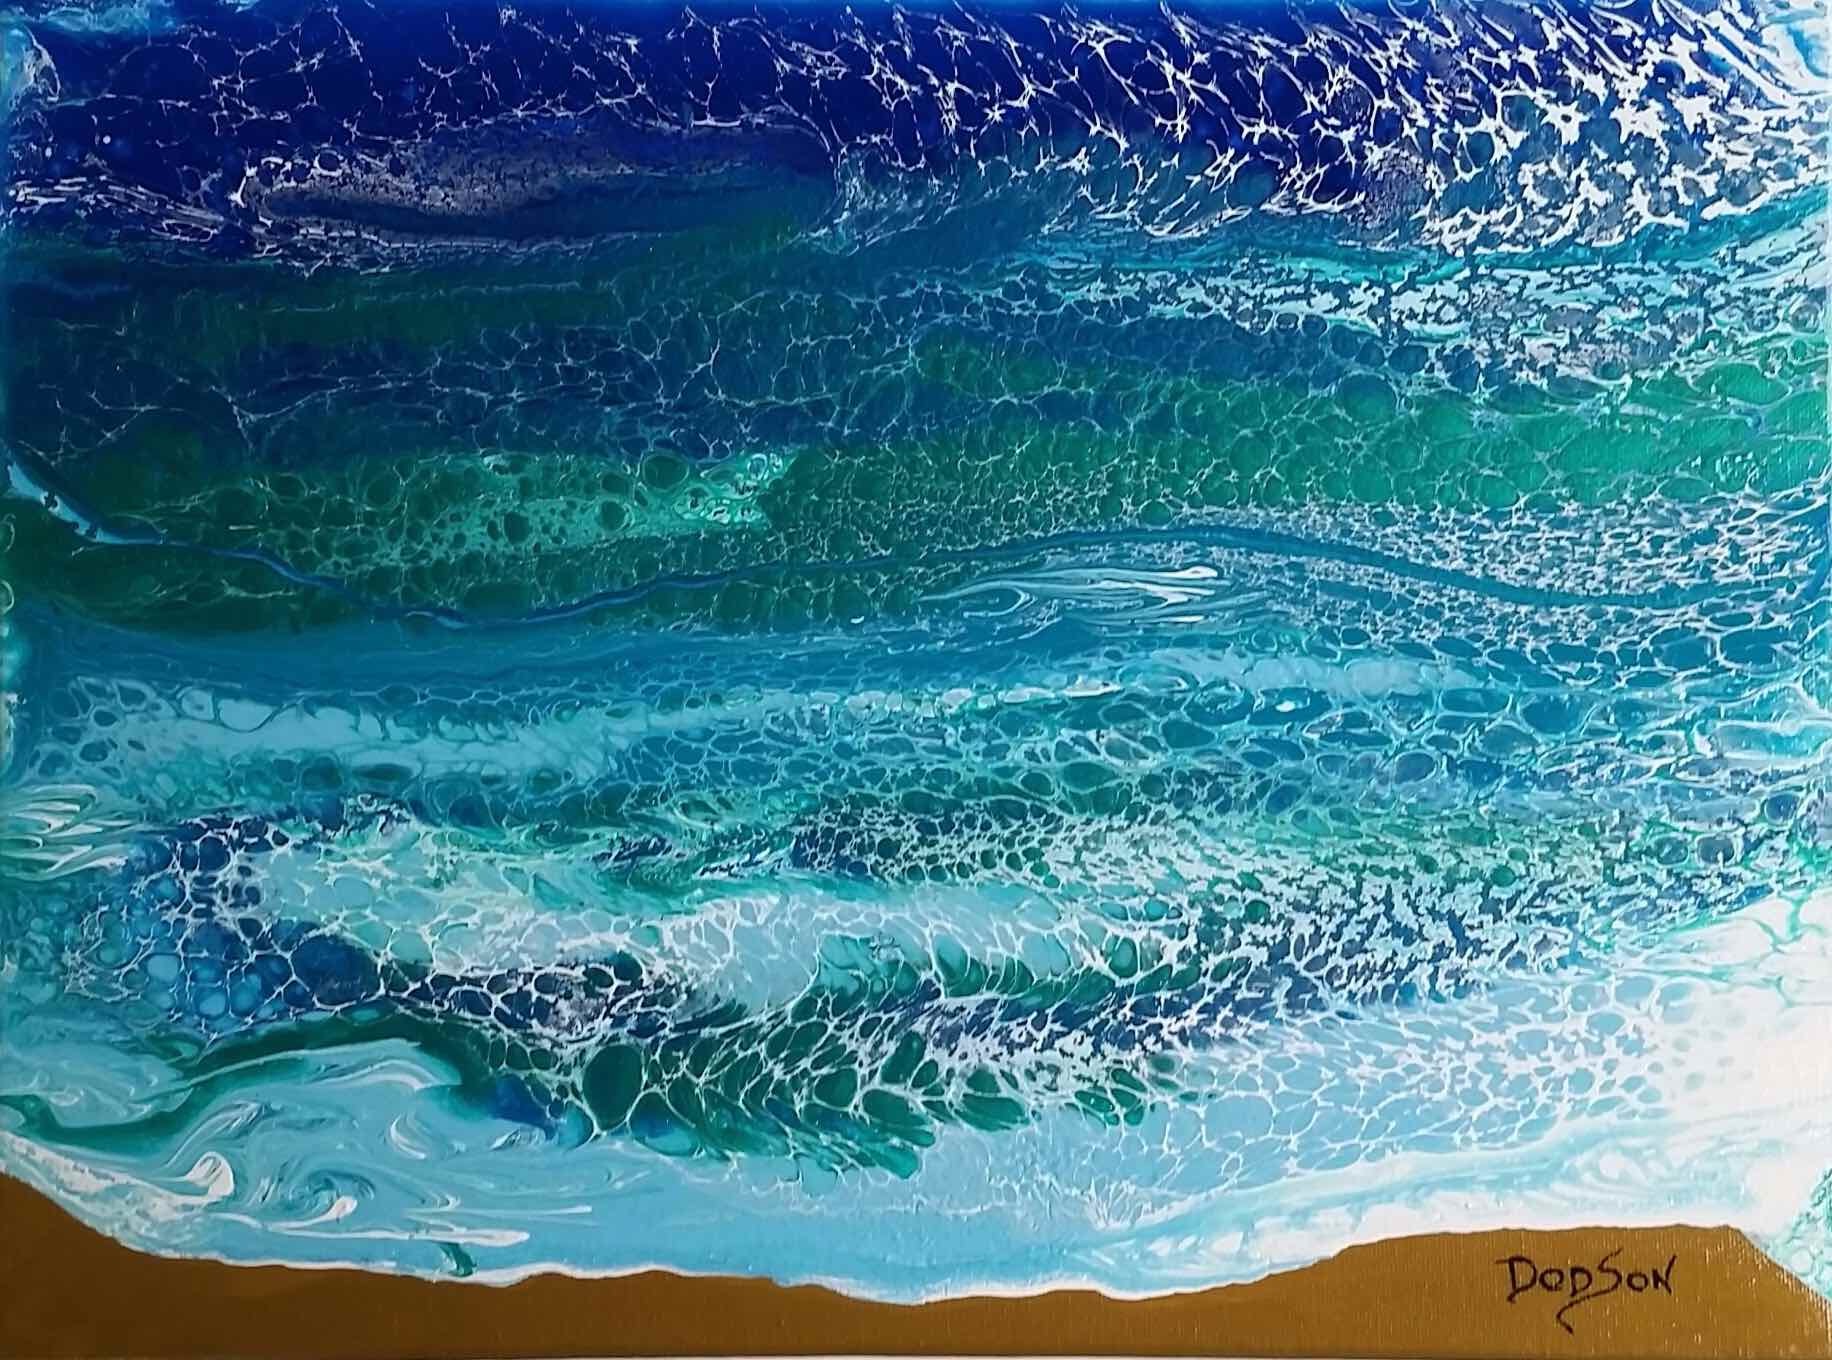 Ocean Art Gallery will reveal St. Augustine artist Dara Dodson’s most recent acrylic paintings at an art opening on March 2. Photo courtesy of Frank Gromling